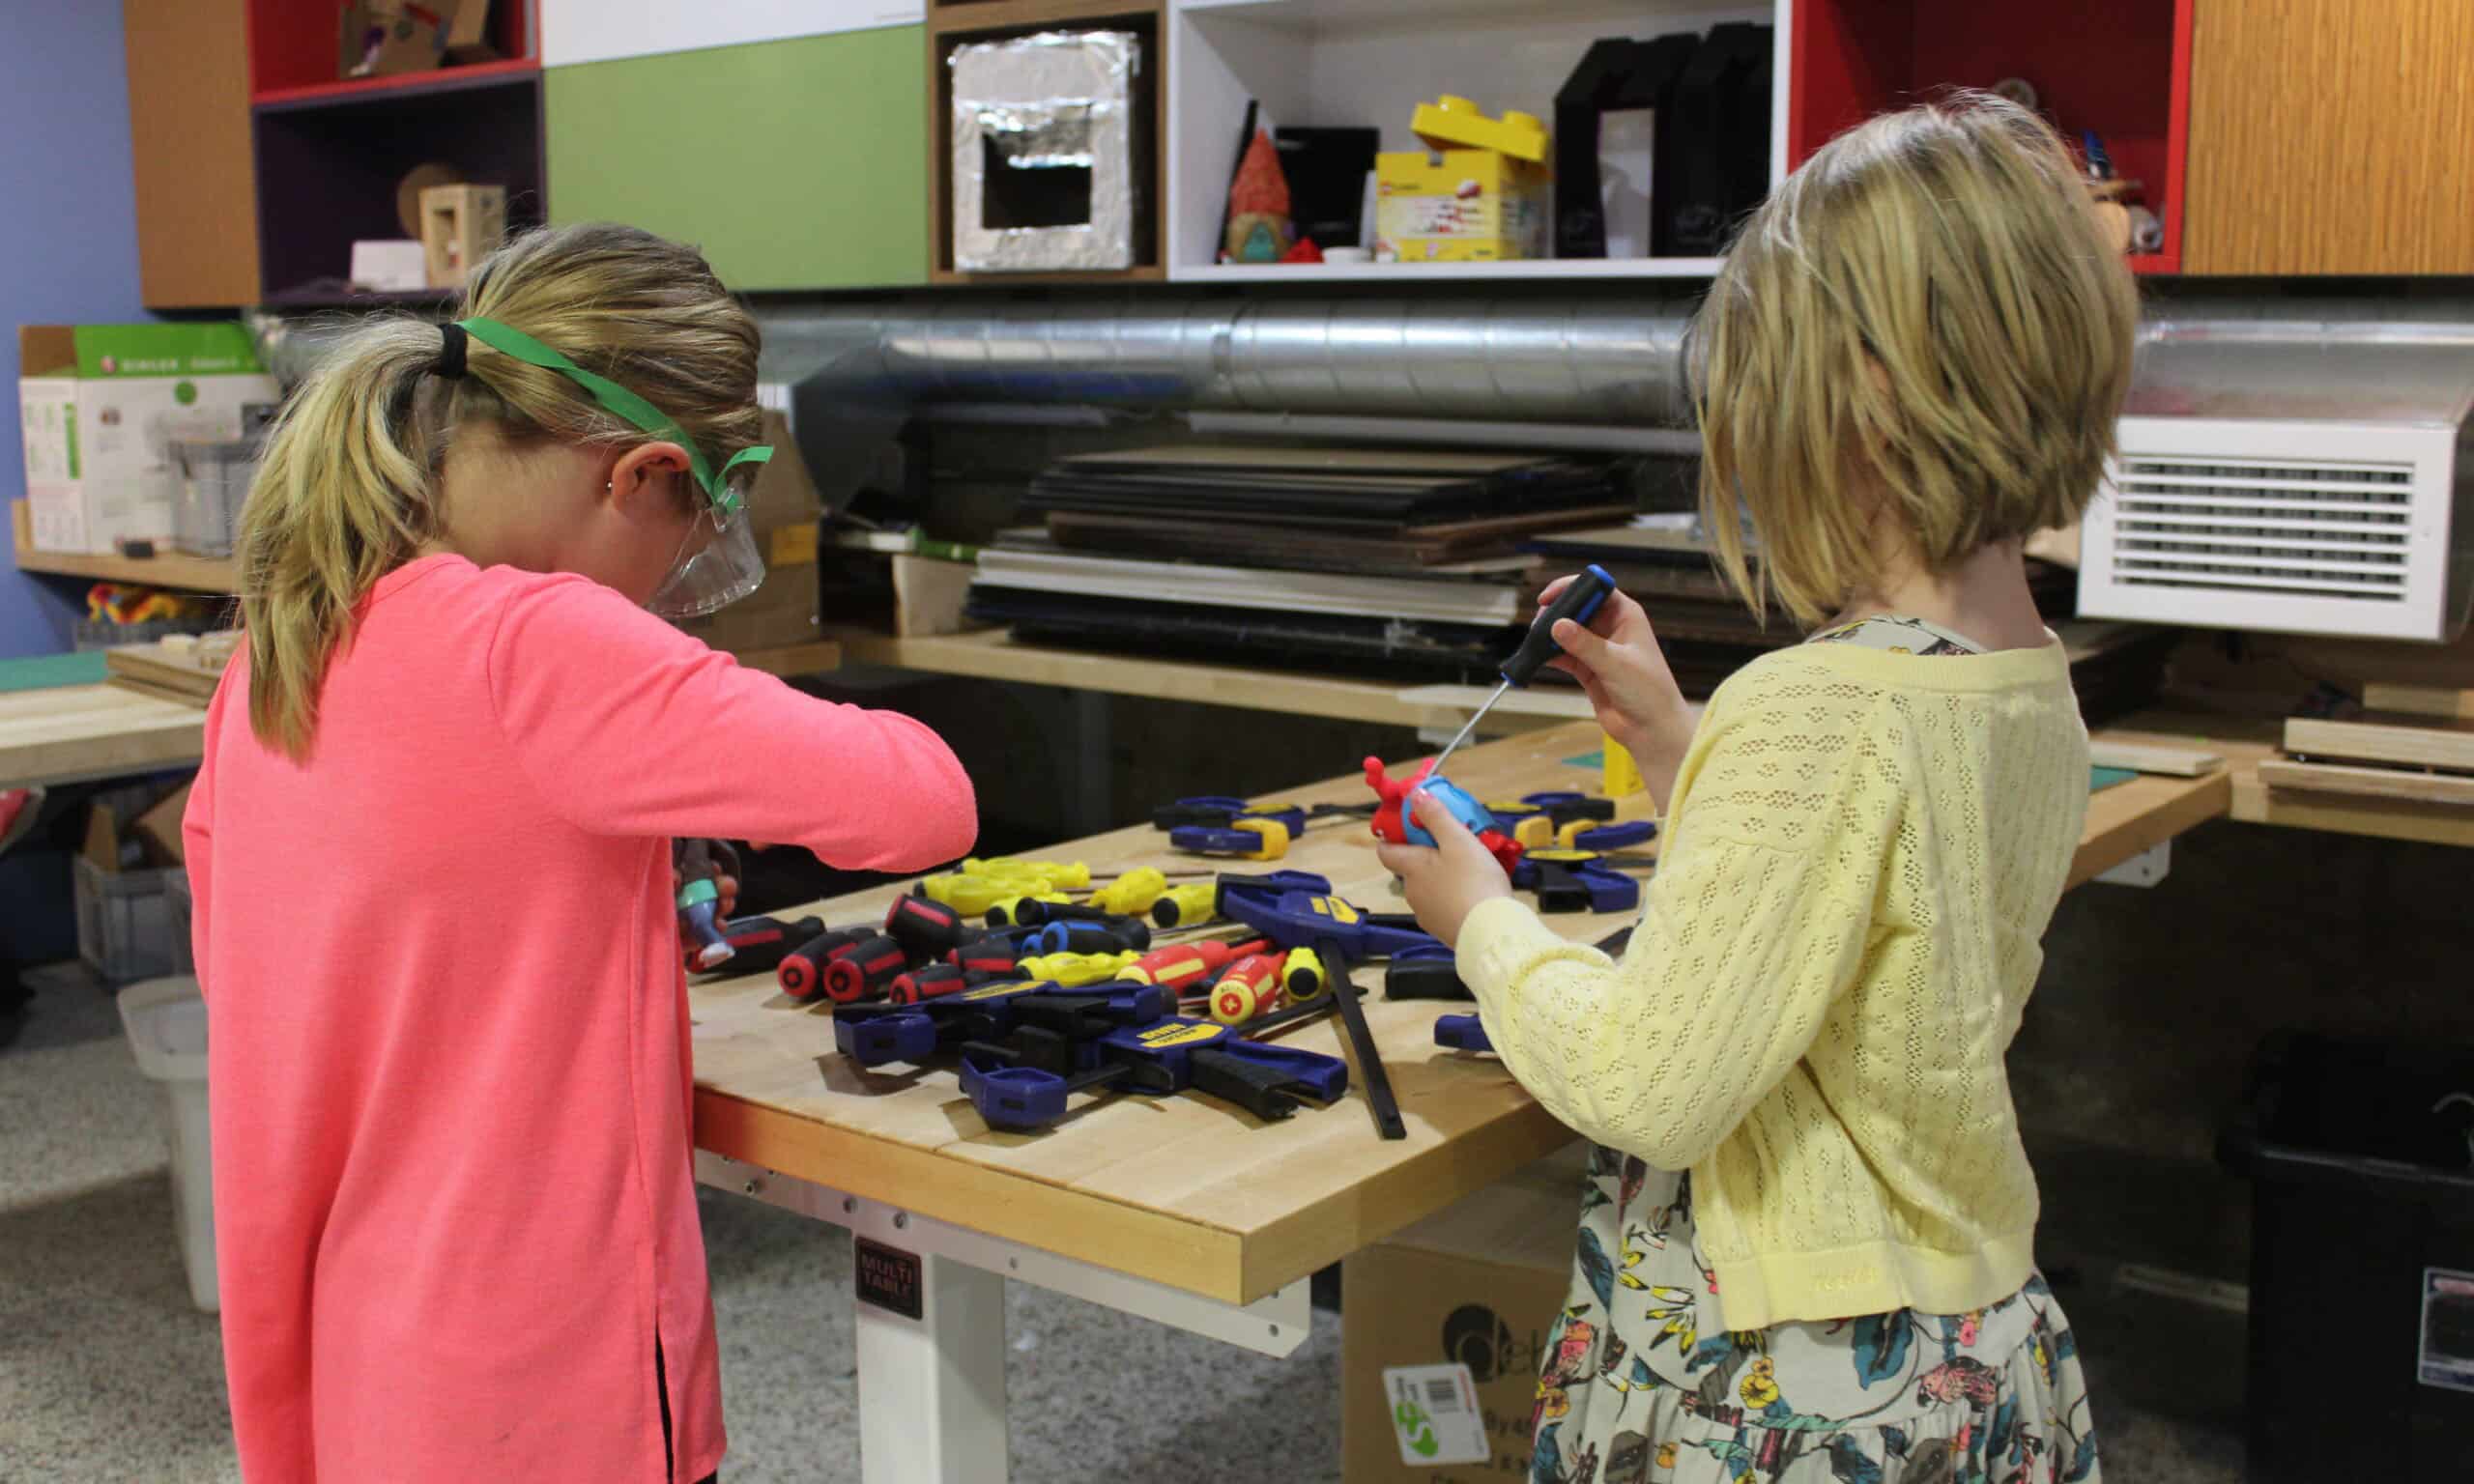 Two young people wearing safety goggles working with tools on a project